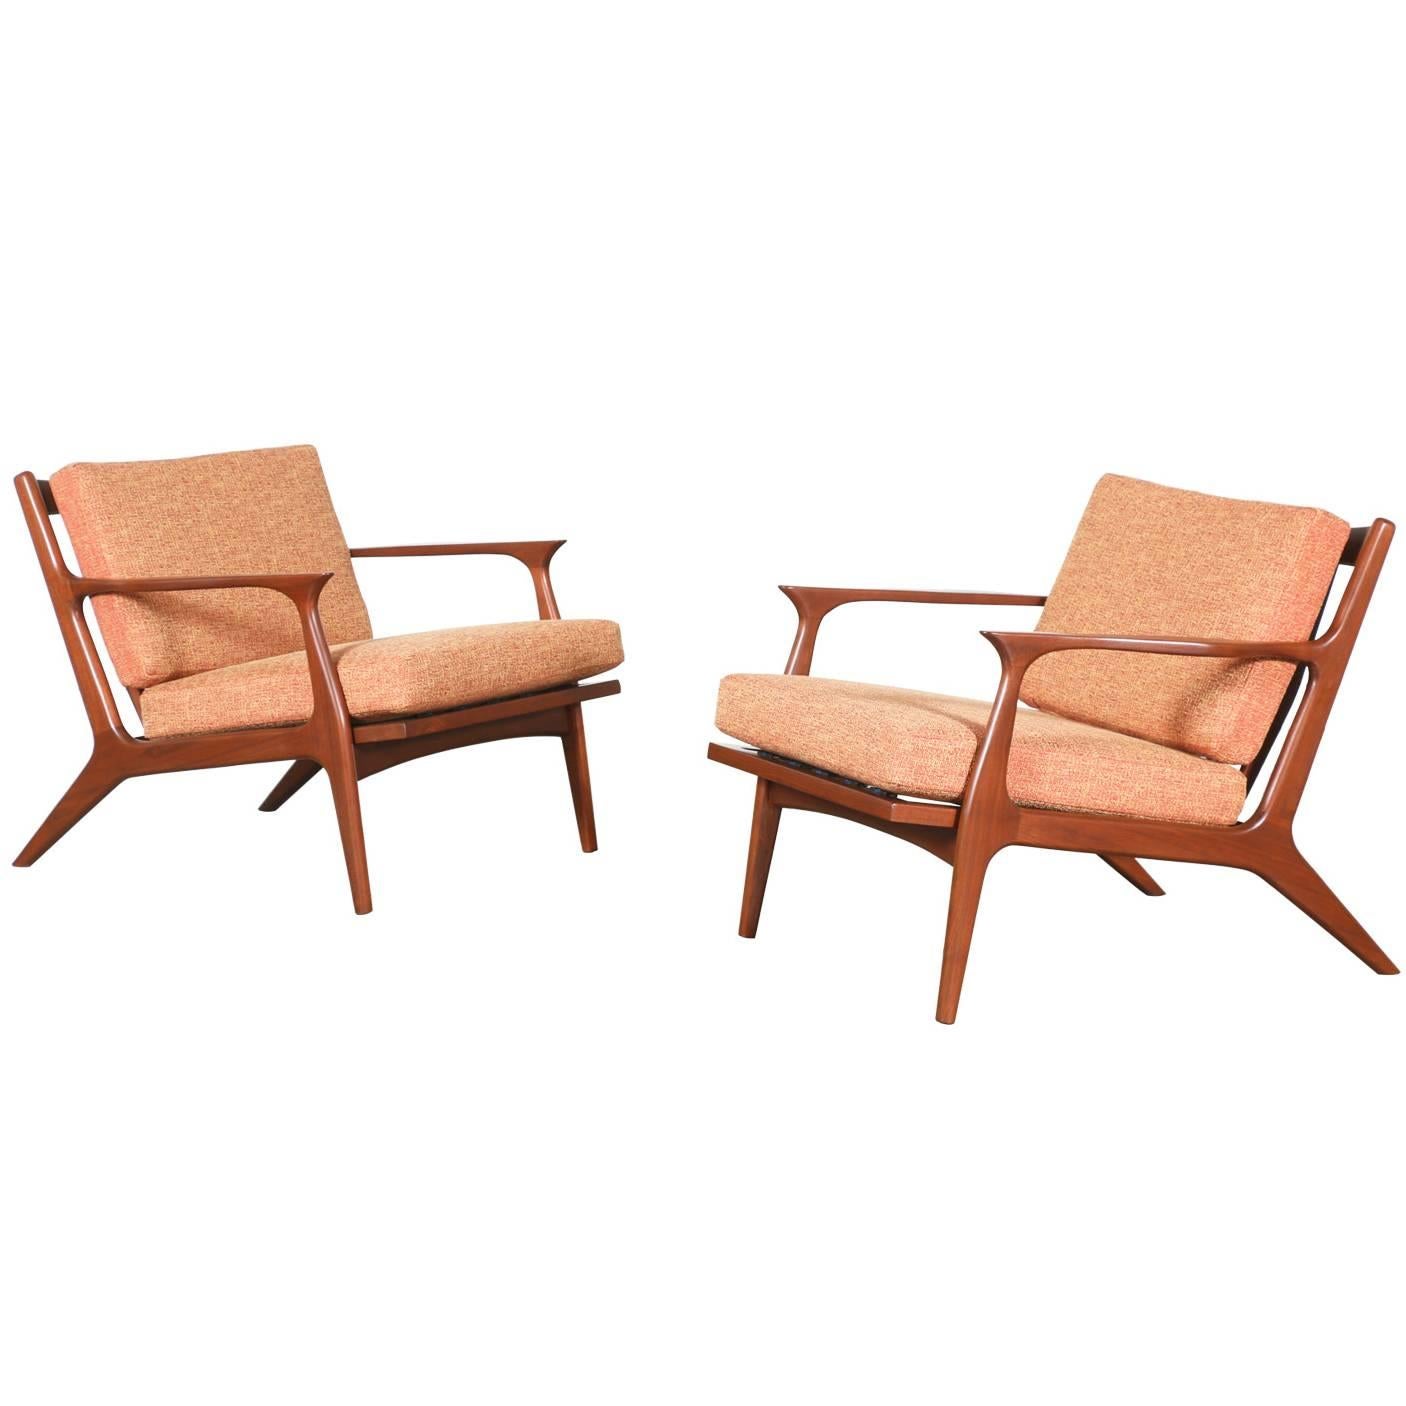 Pair of Mid-Century Sculpted Walnut Lounge Chairs